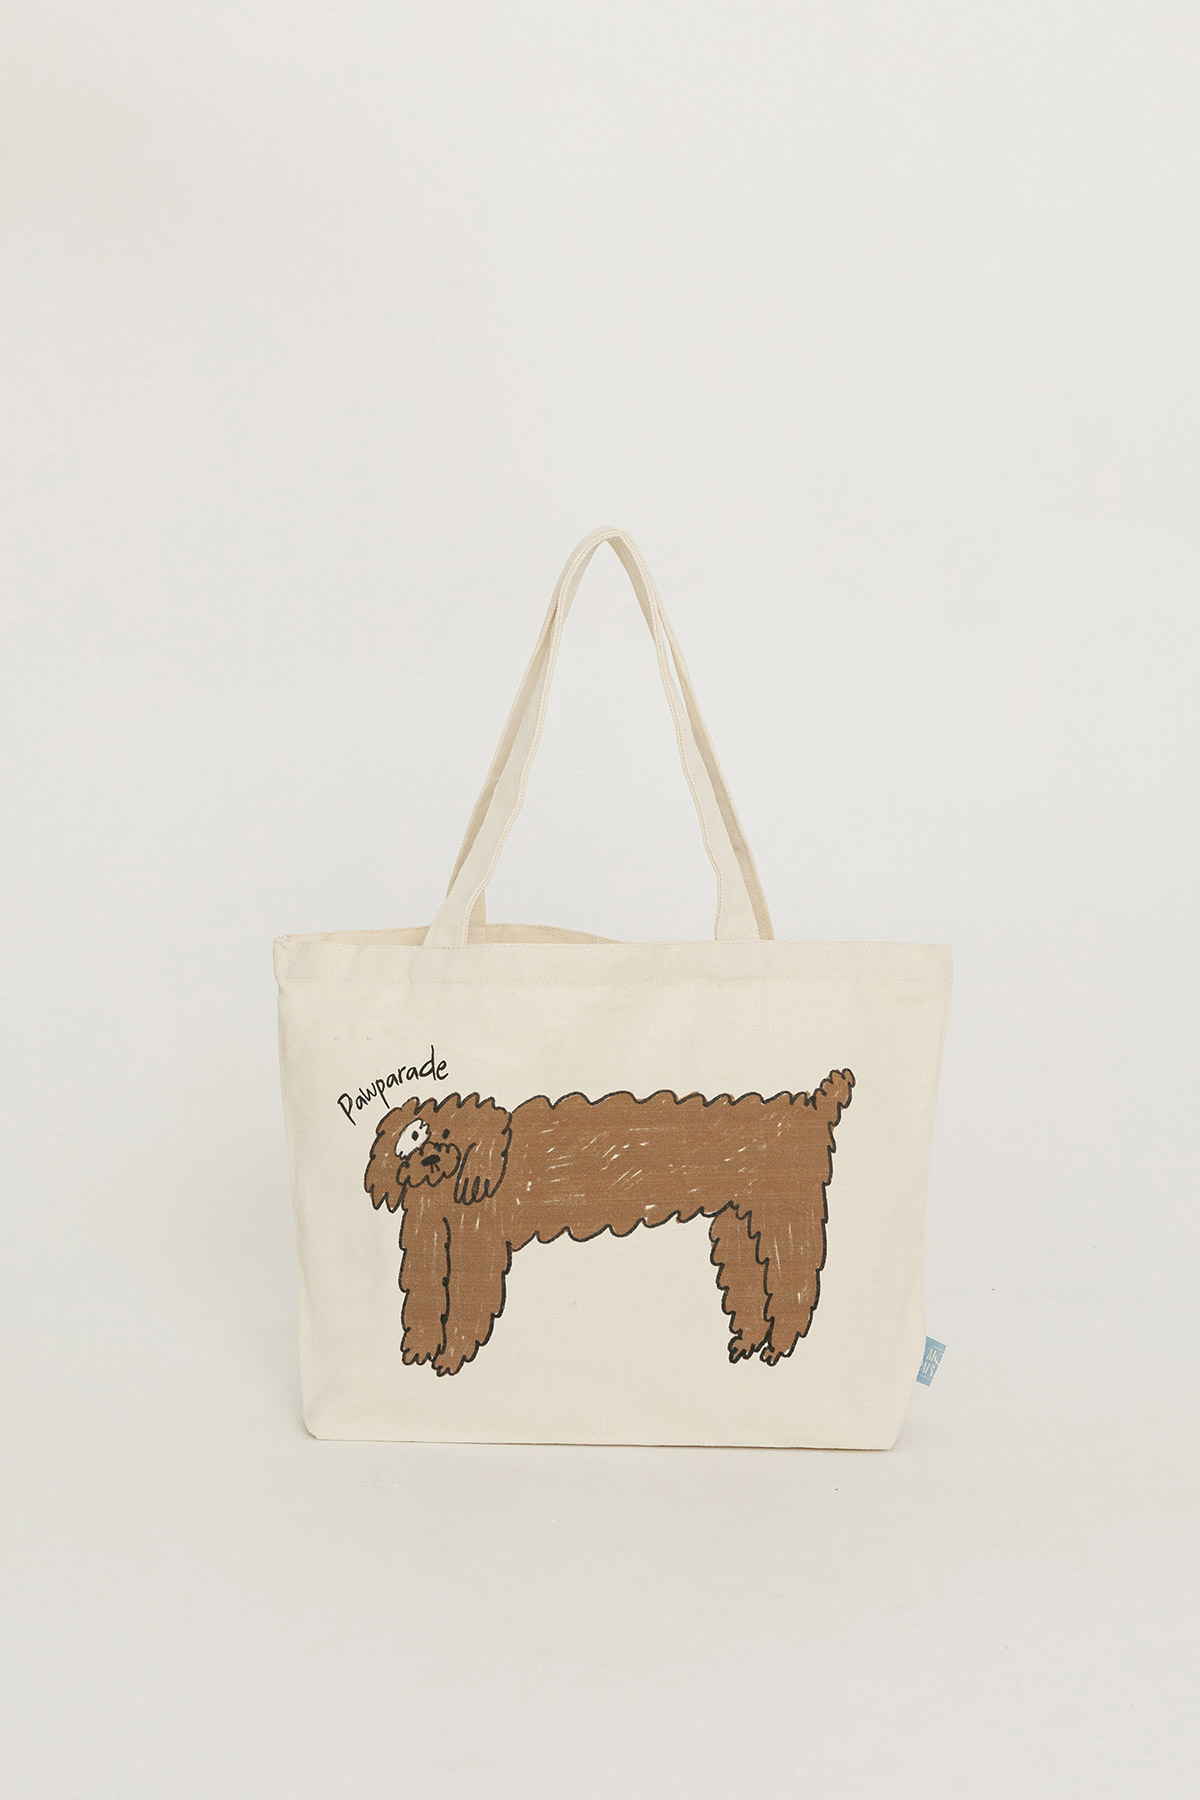 *SALE* PAWPARADE TOTE - PATCHIE POODLE [BY MODPARADE]